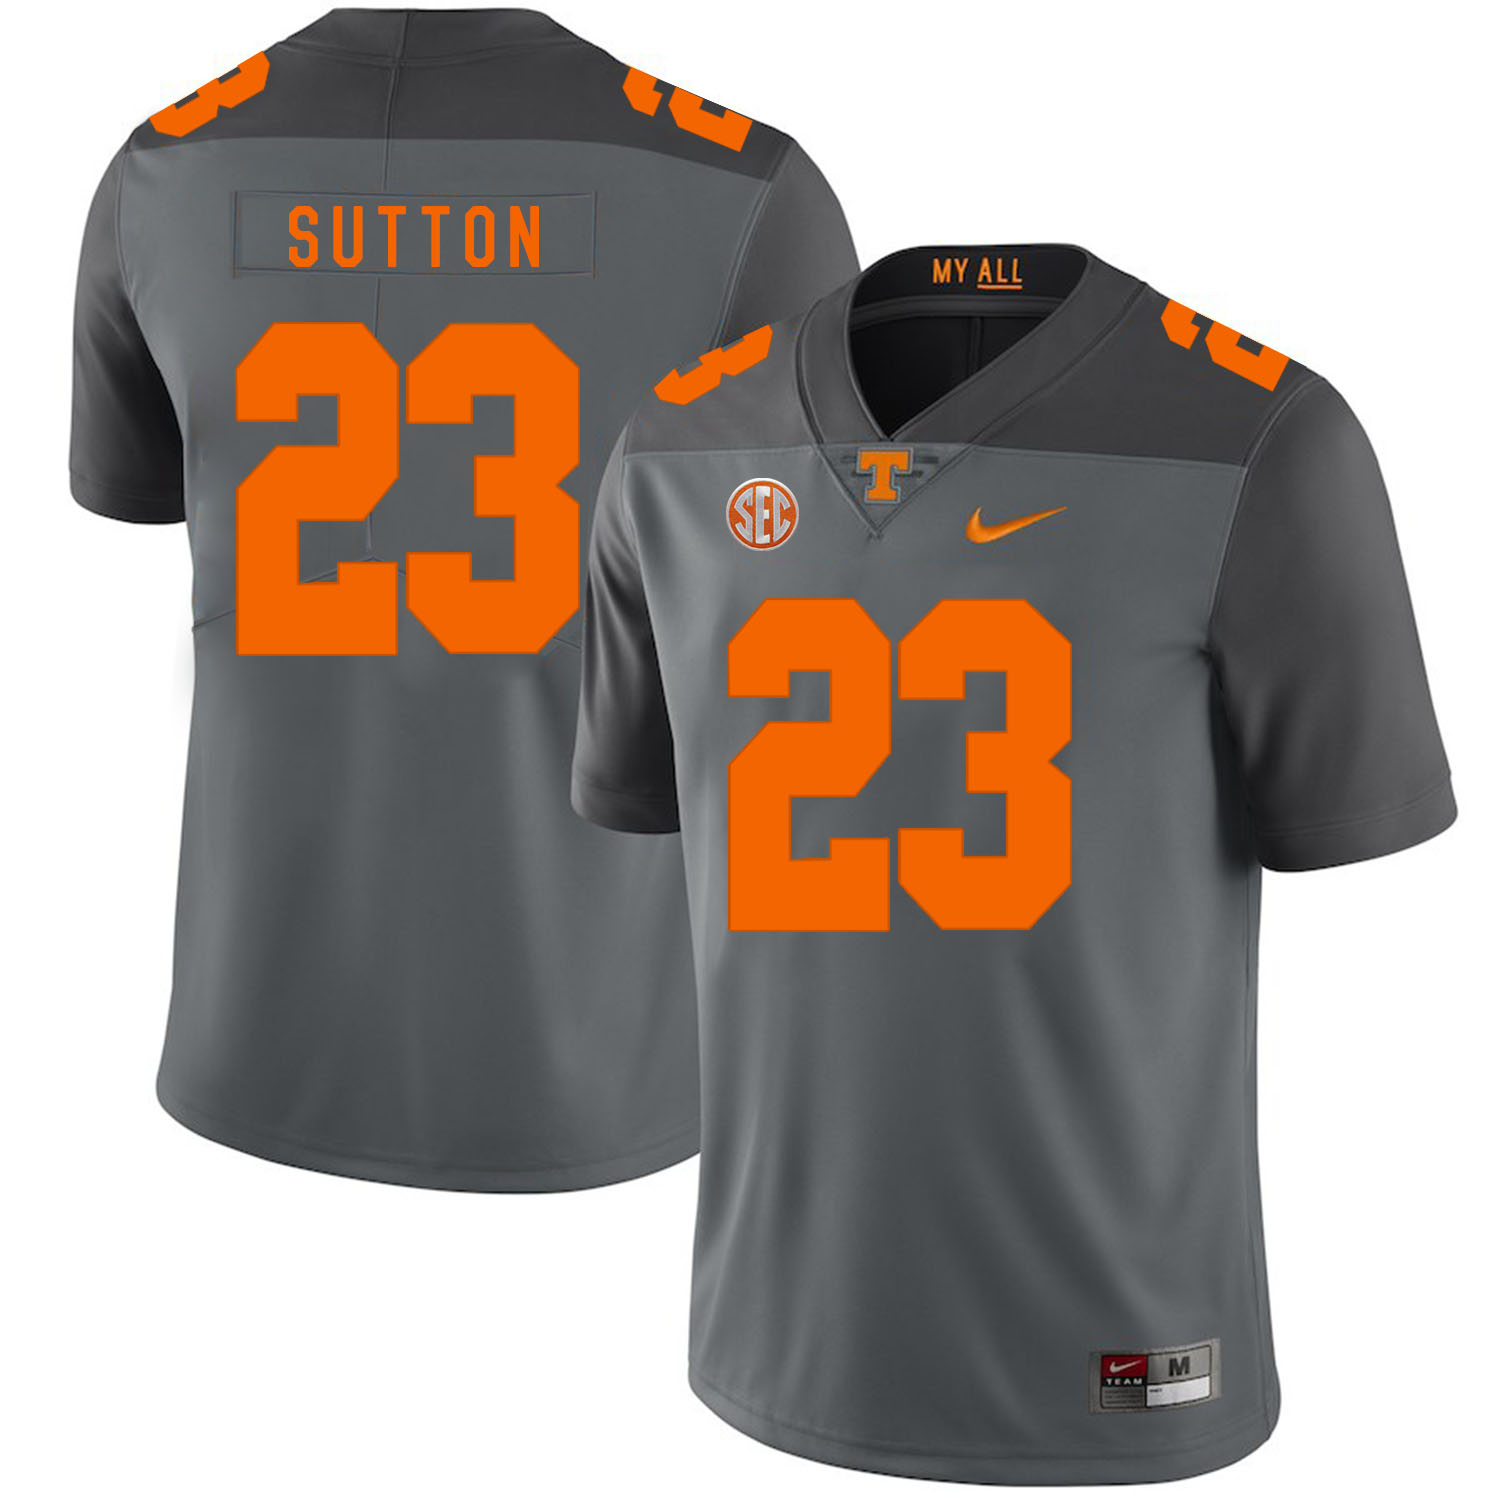 Tennessee Volunteers 23 Cameron Sutton Gray Nike College Football Jersey